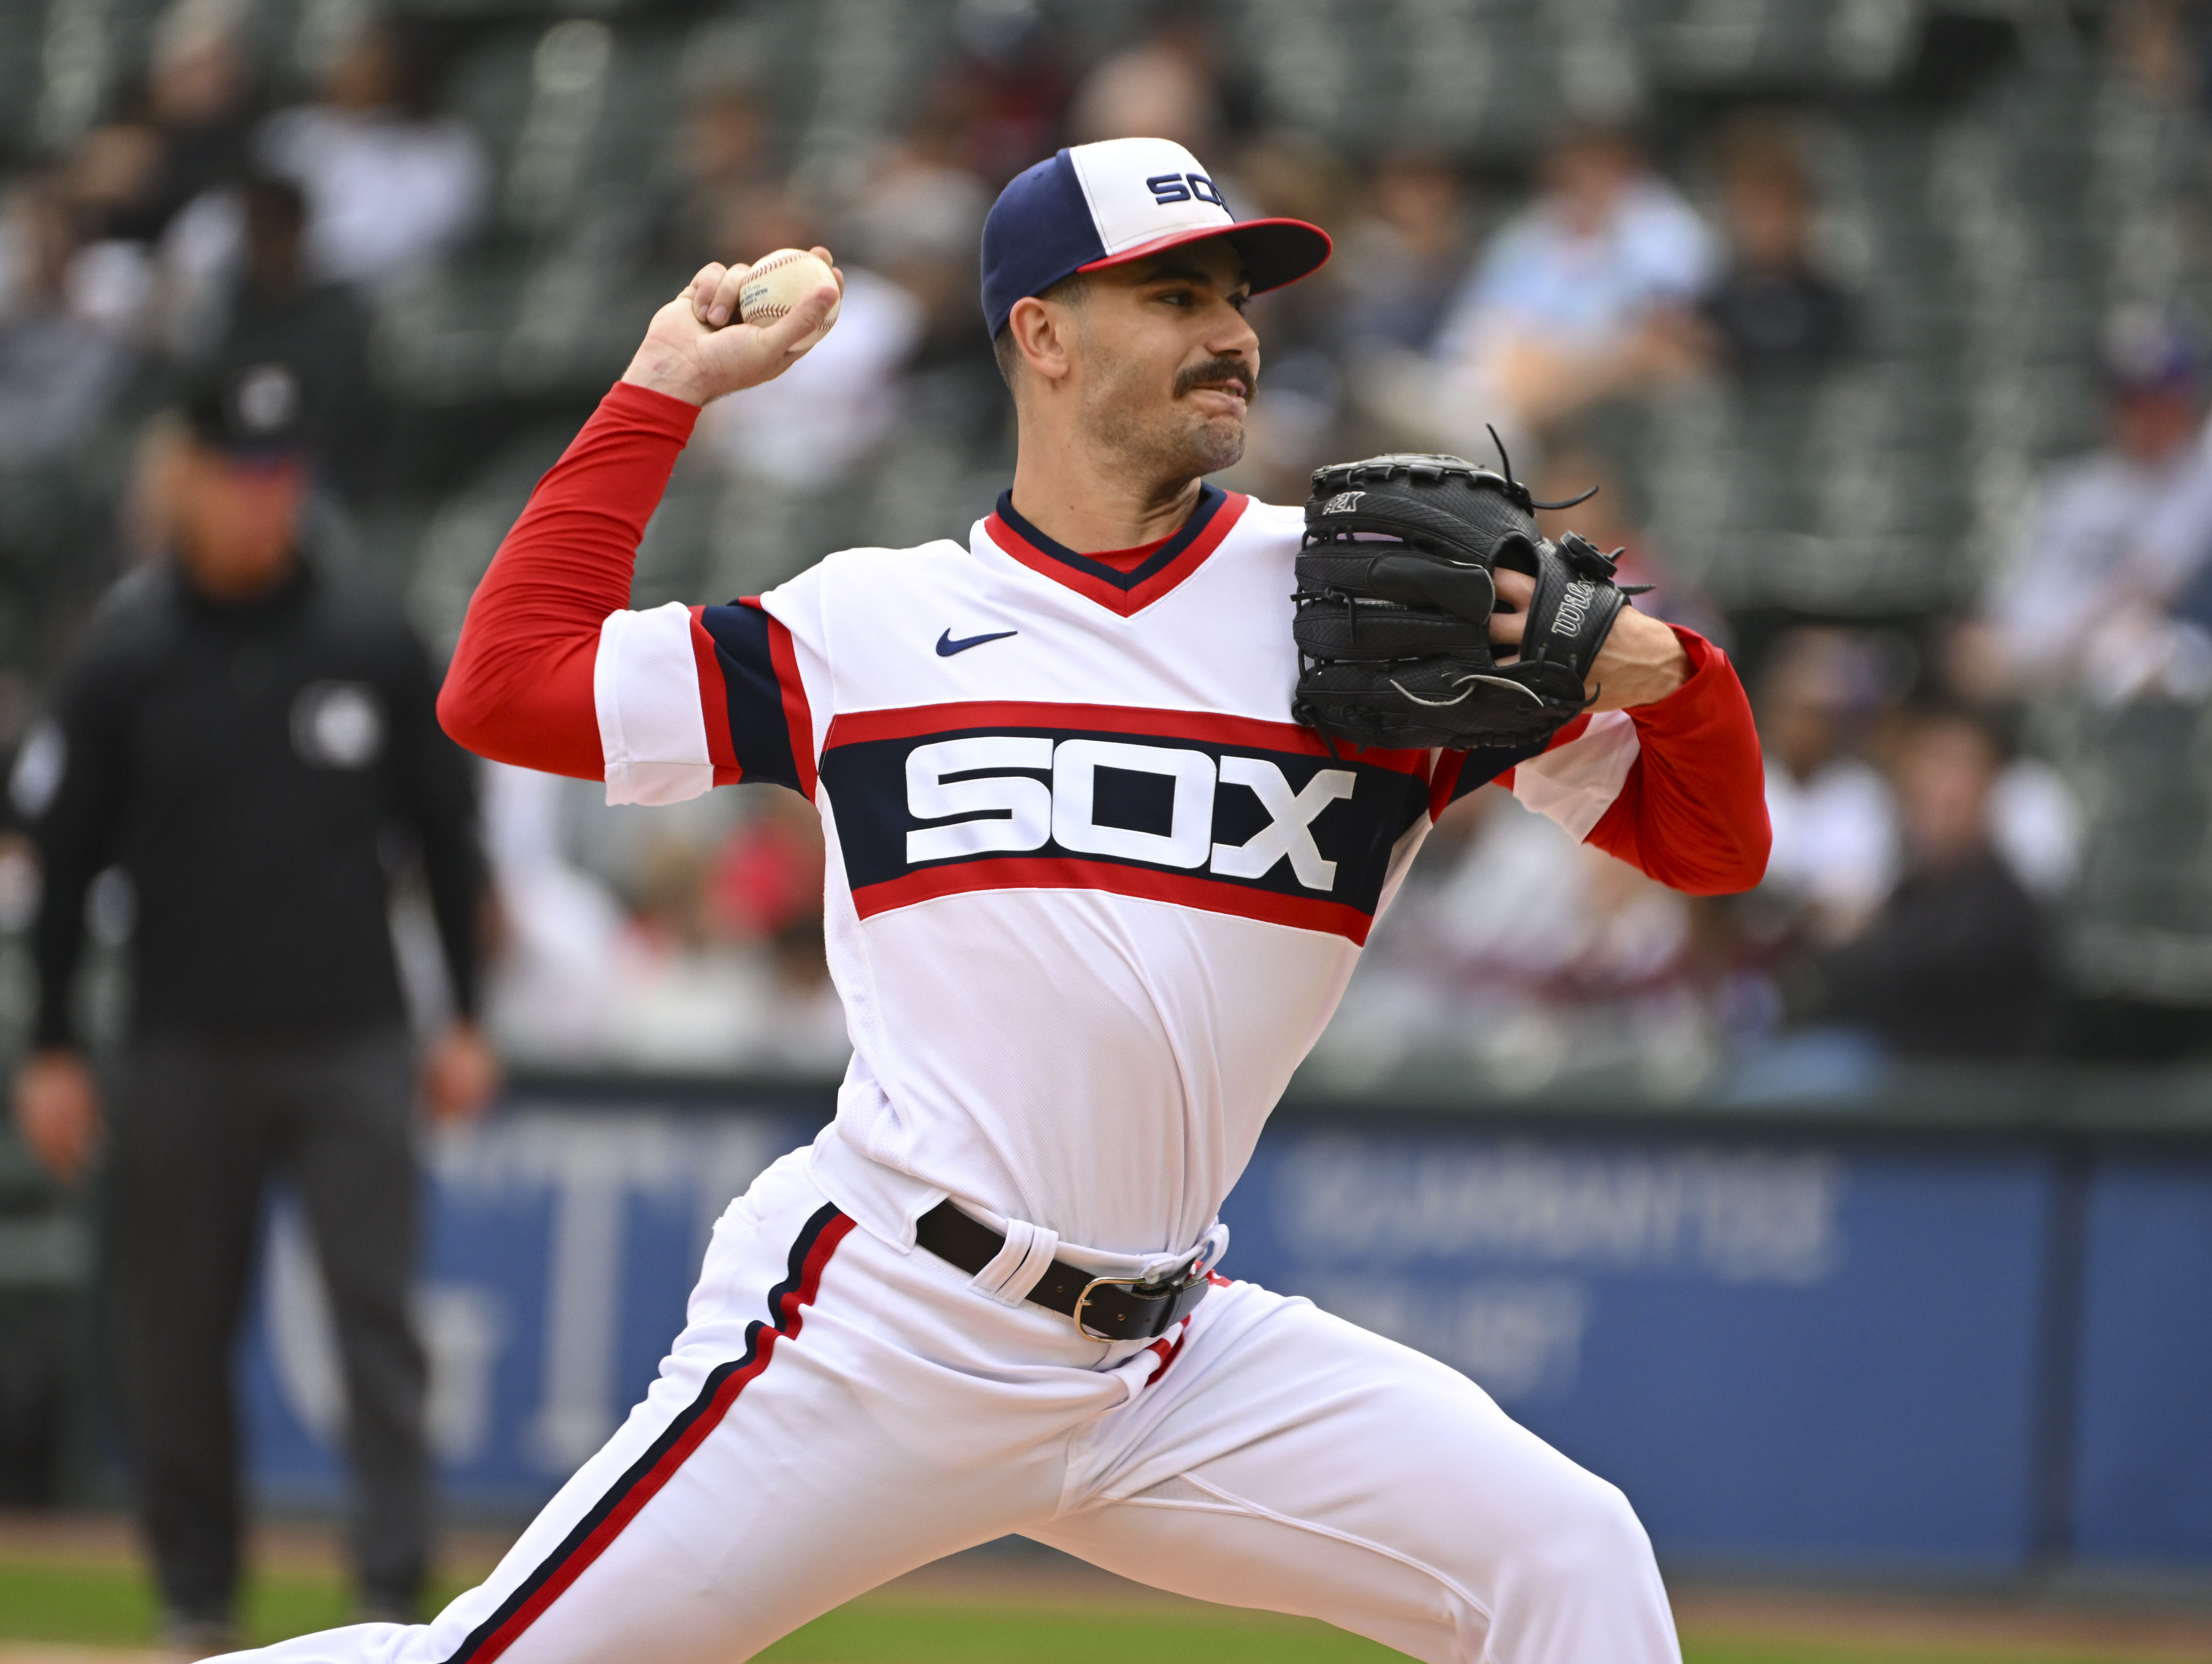 South Side Sox Top Prospect No. 3: Dylan Cease - South Side Sox